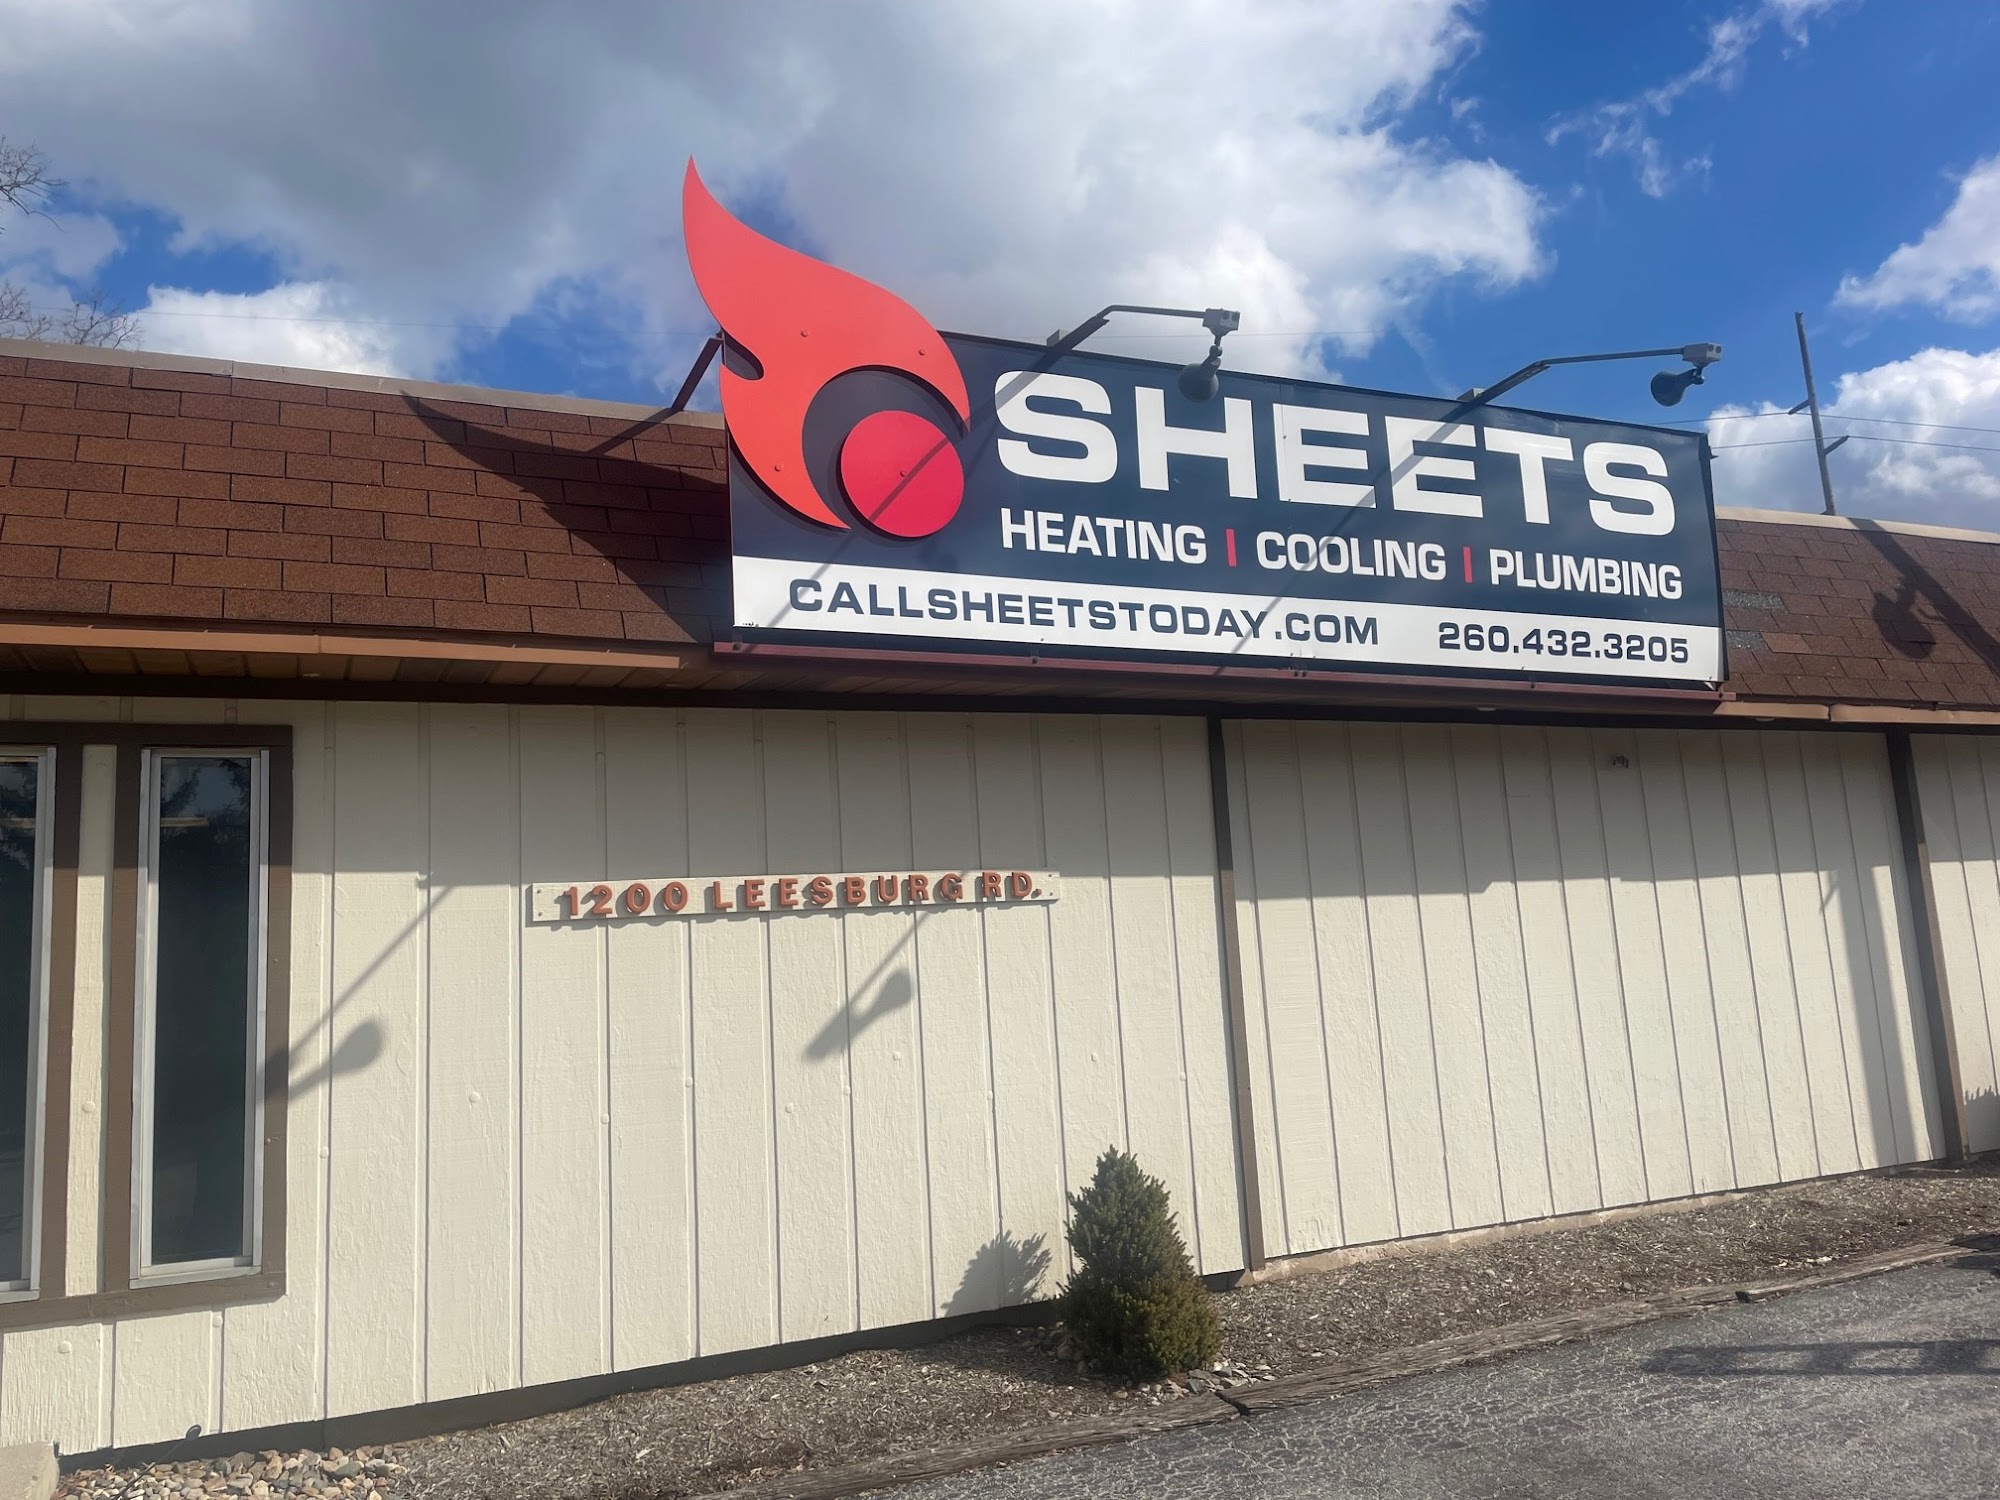 Sheets Heating, Cooling and Plumbing